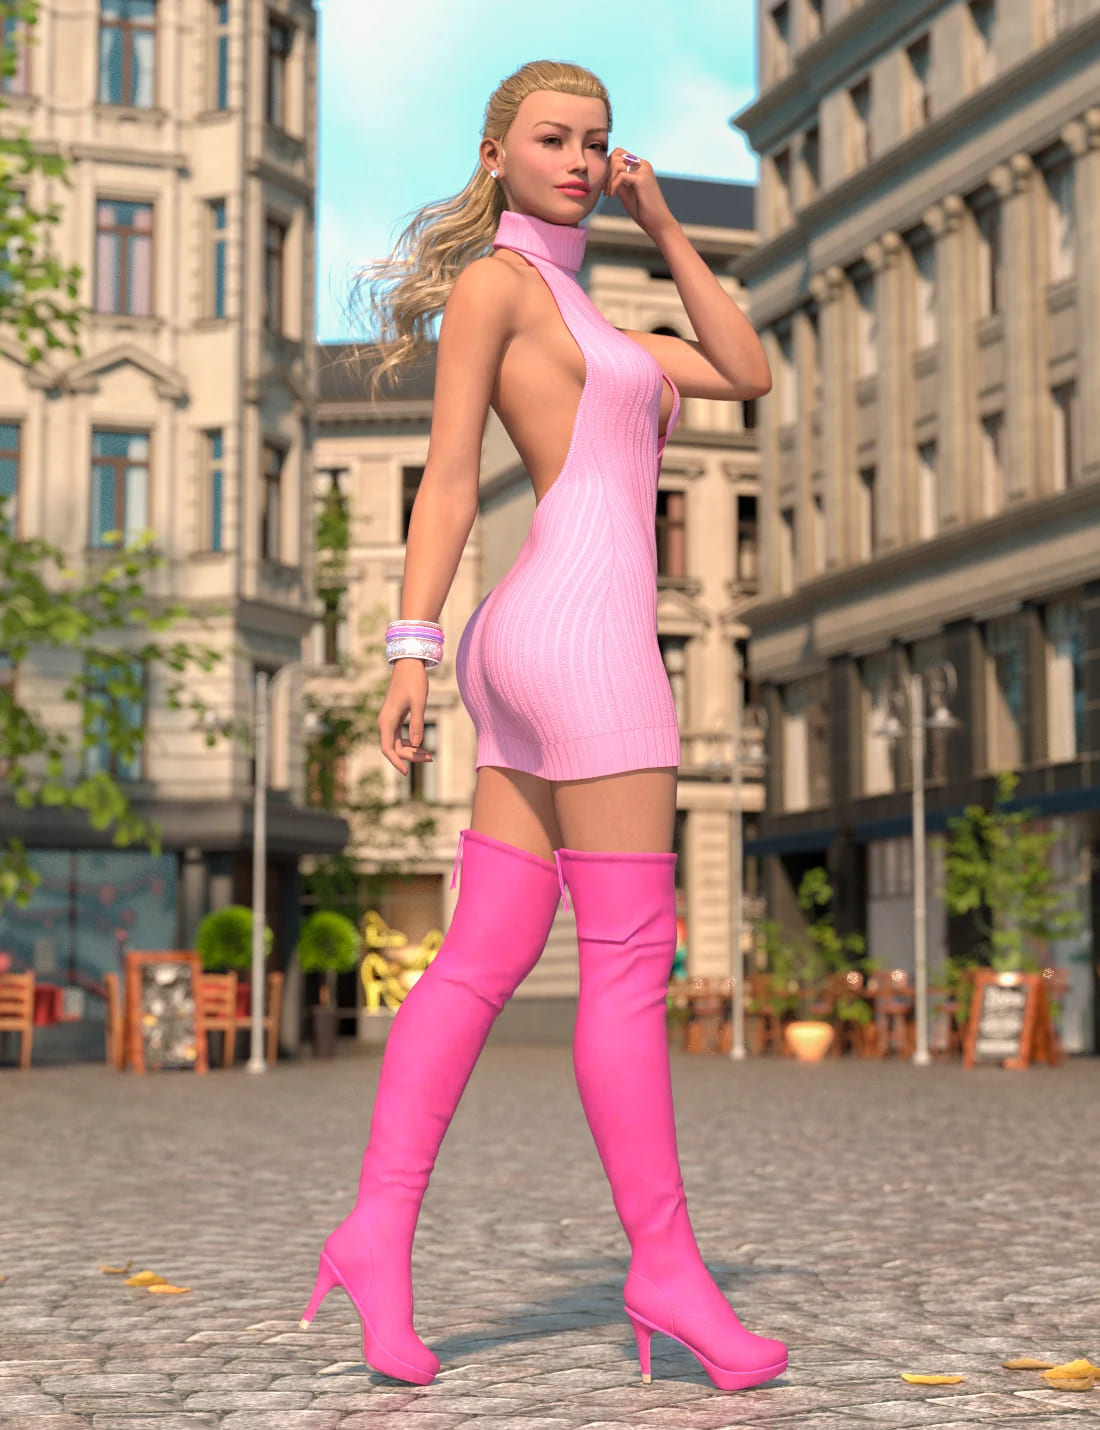 Simply Sexy dForce Outfit for Genesis 9 Base Feminine_DAZ3D下载站